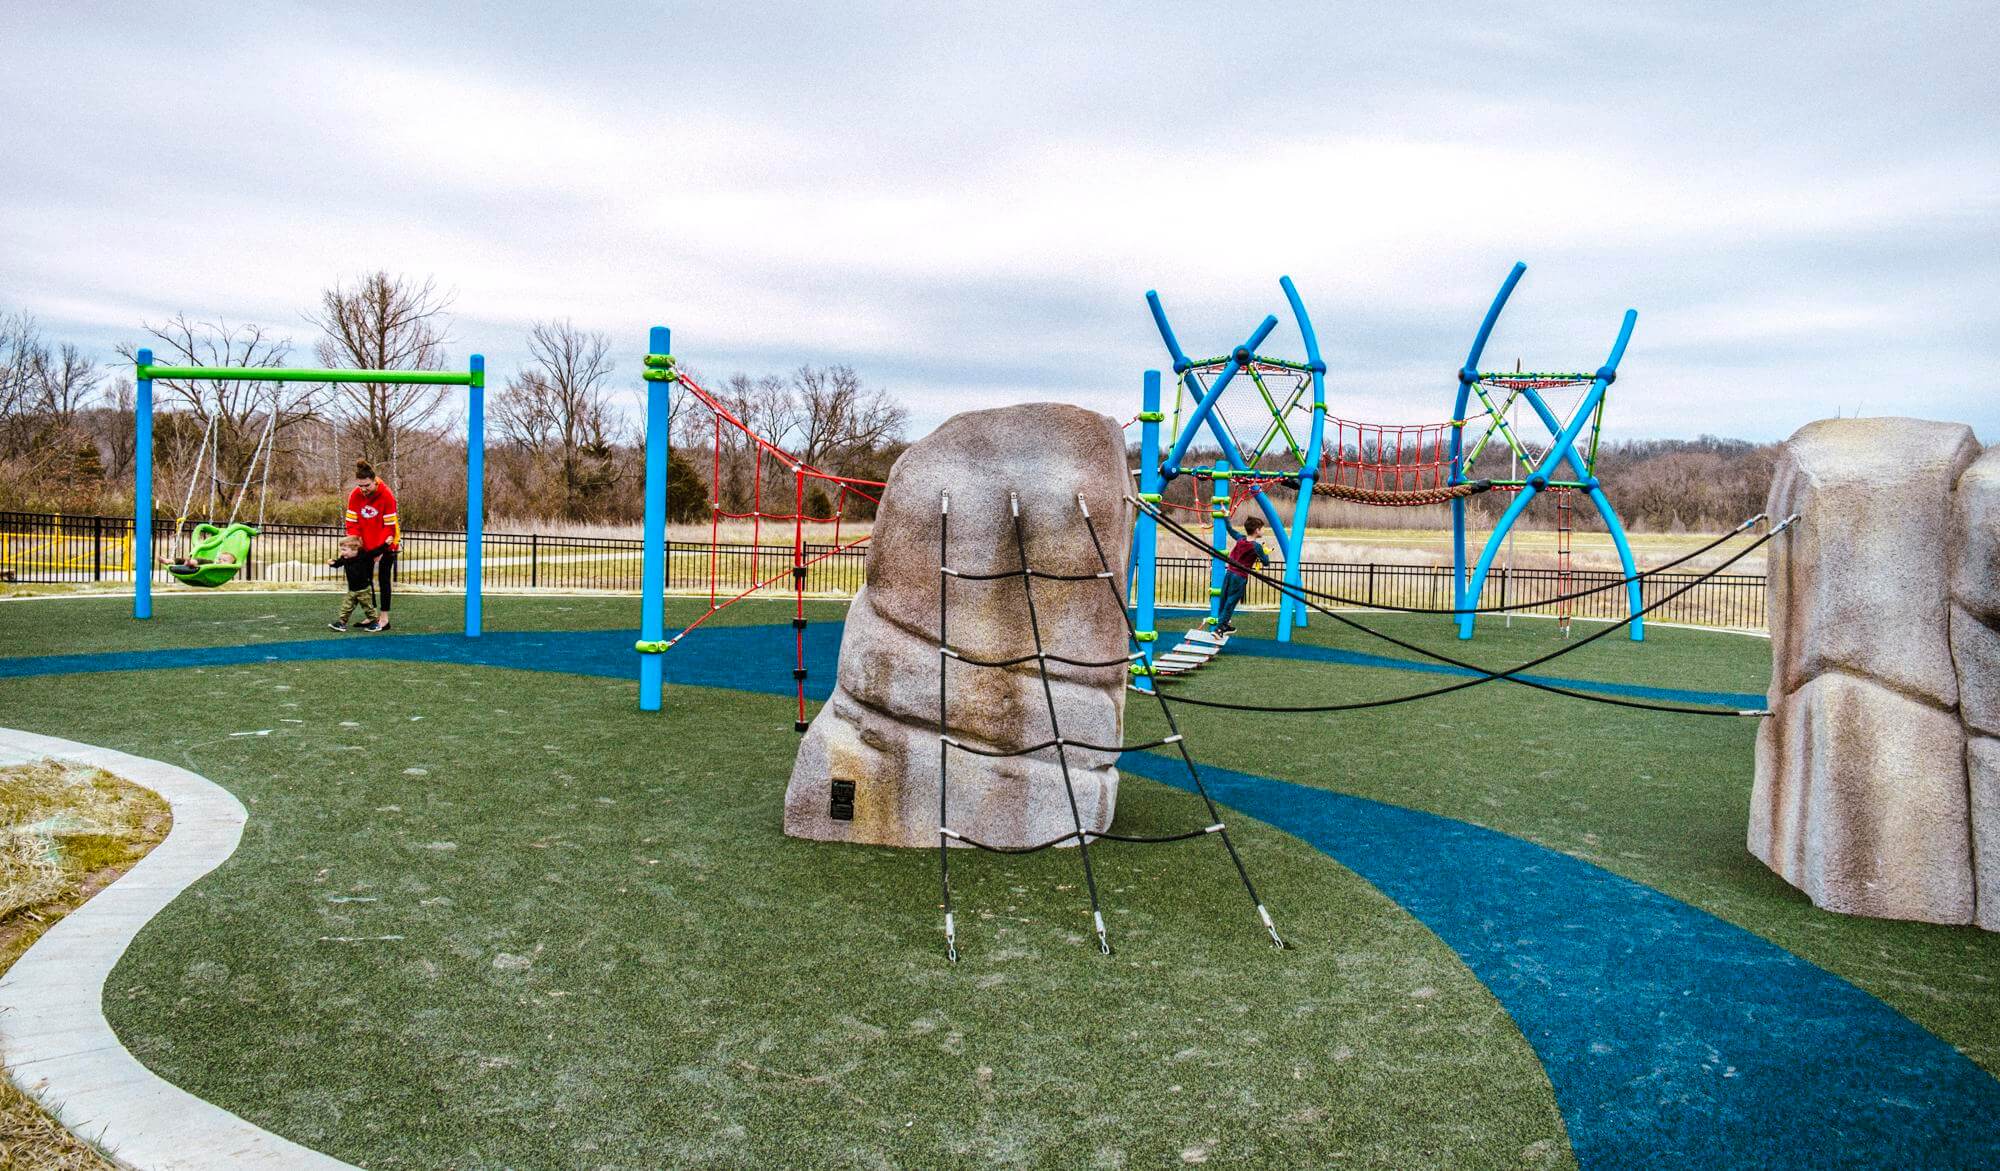 A playground featuring a series of sculptural climbing boulders interconnected with rope bridges, against a backdrop of a vibrant rope climbing structure.